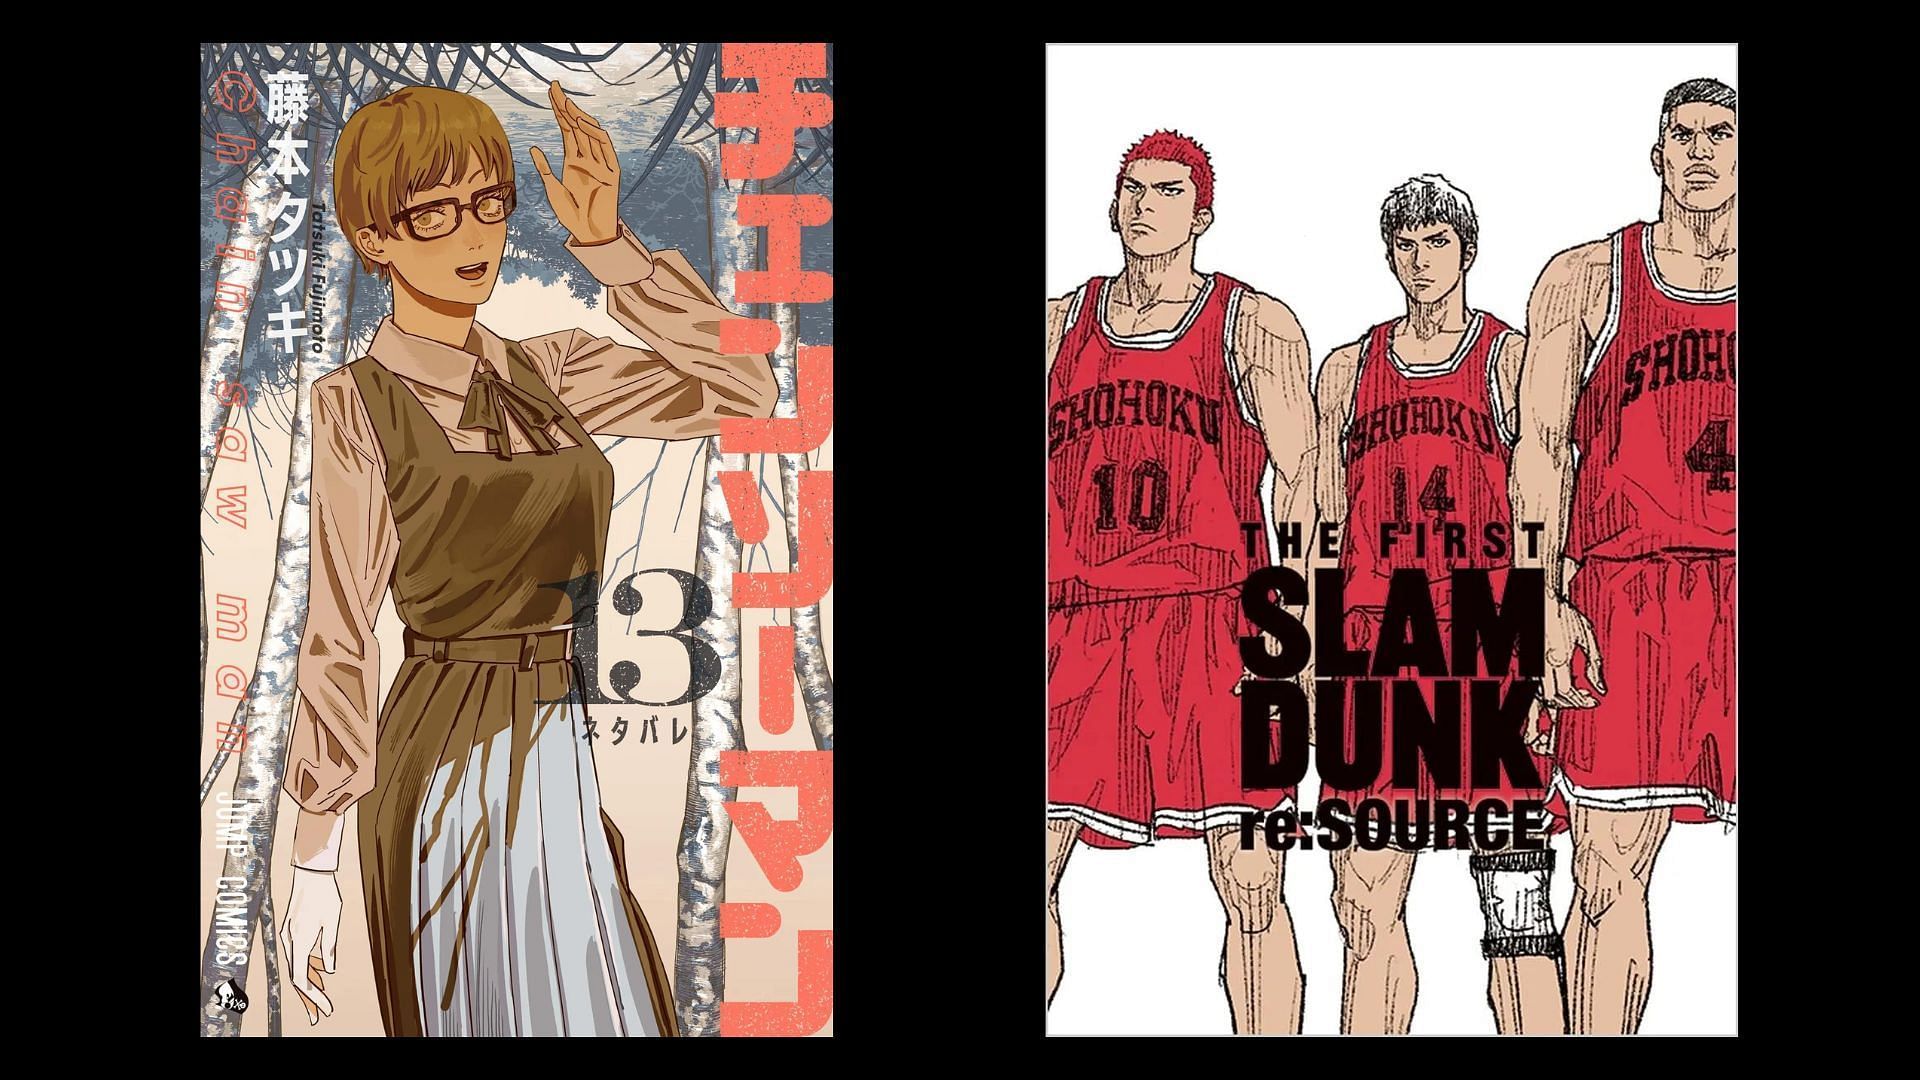 Chainsaw Man volume 13 and THE FIRST SLAM DUNK re:SOURCE covers (Image via Shueisha)